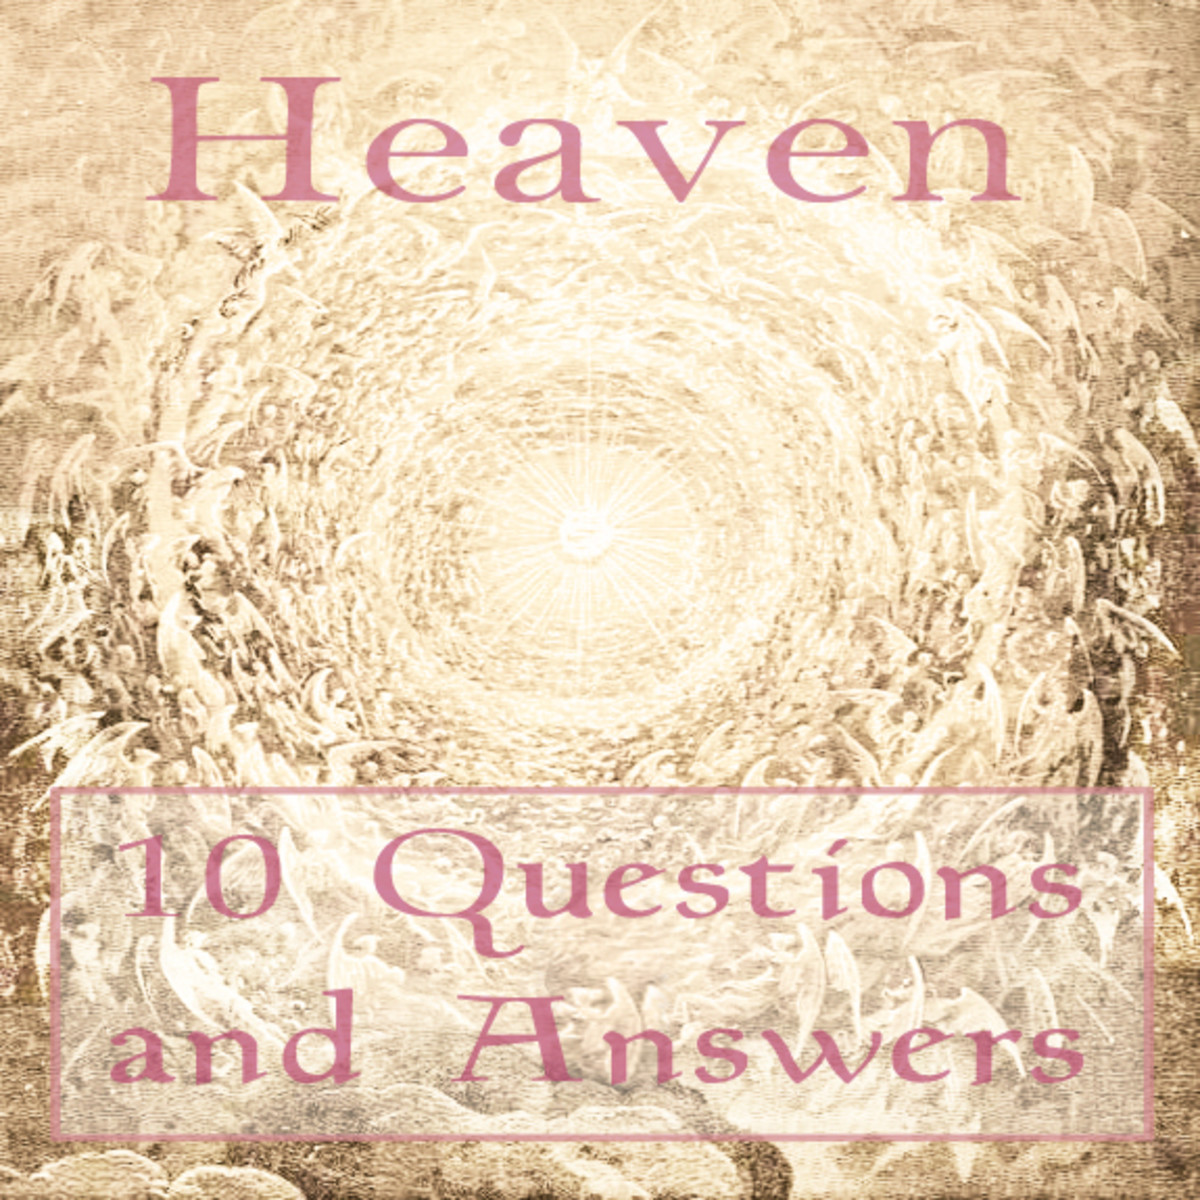 Read on to discover helpful answers to common questions about heaven.